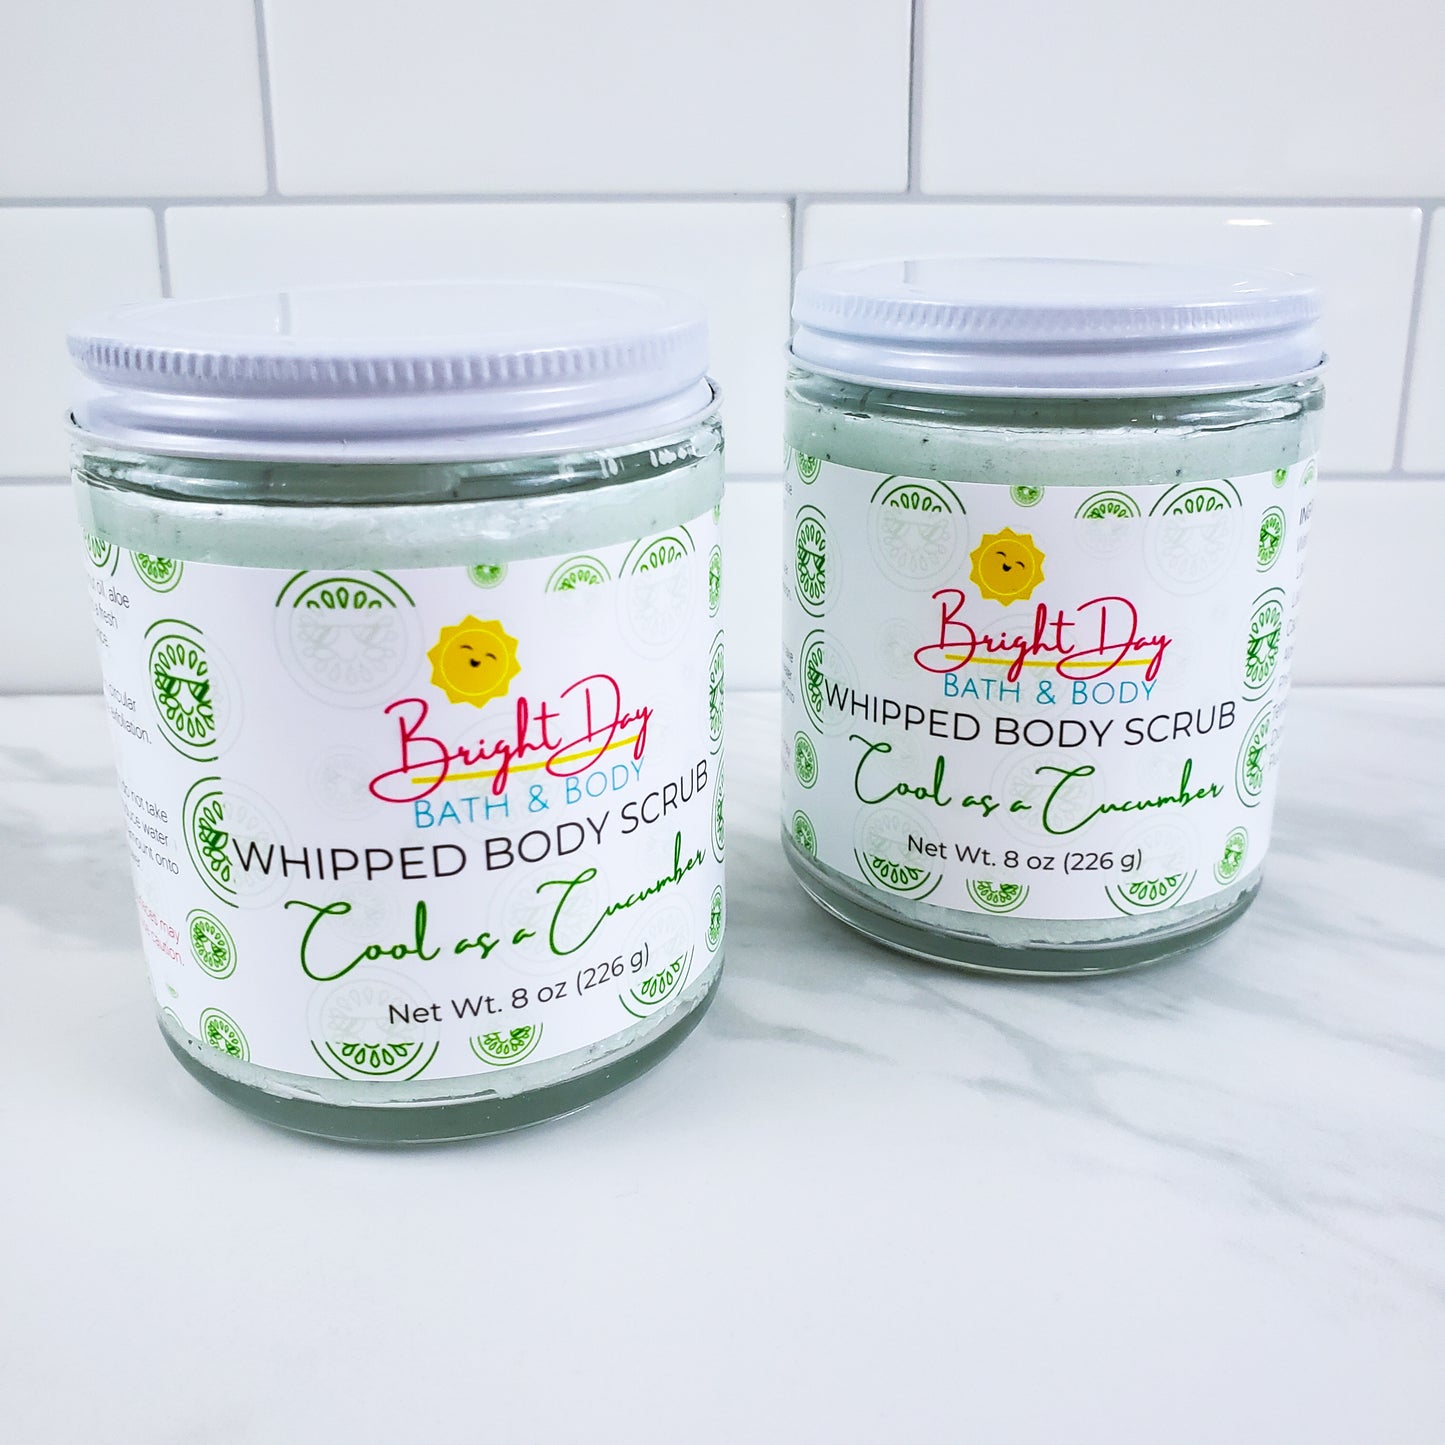 Two Cool as a Cucumber Body Scrubs on a tile background